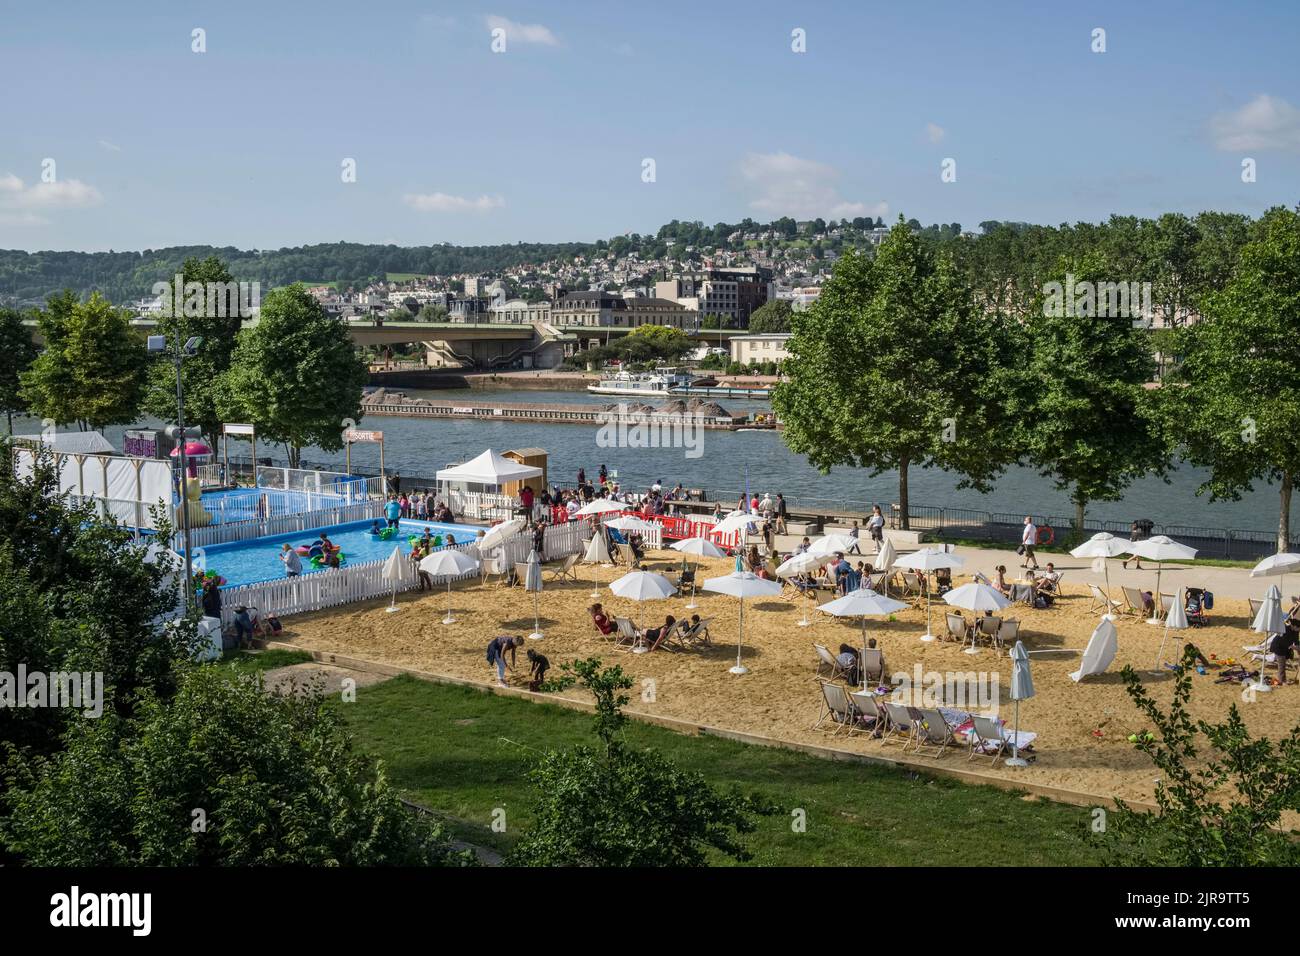 Rouen (Normandy, northern France): 12th edition of the summer event ÒRouen sur MerÓ on the left bank of the River Seine Stock Photo